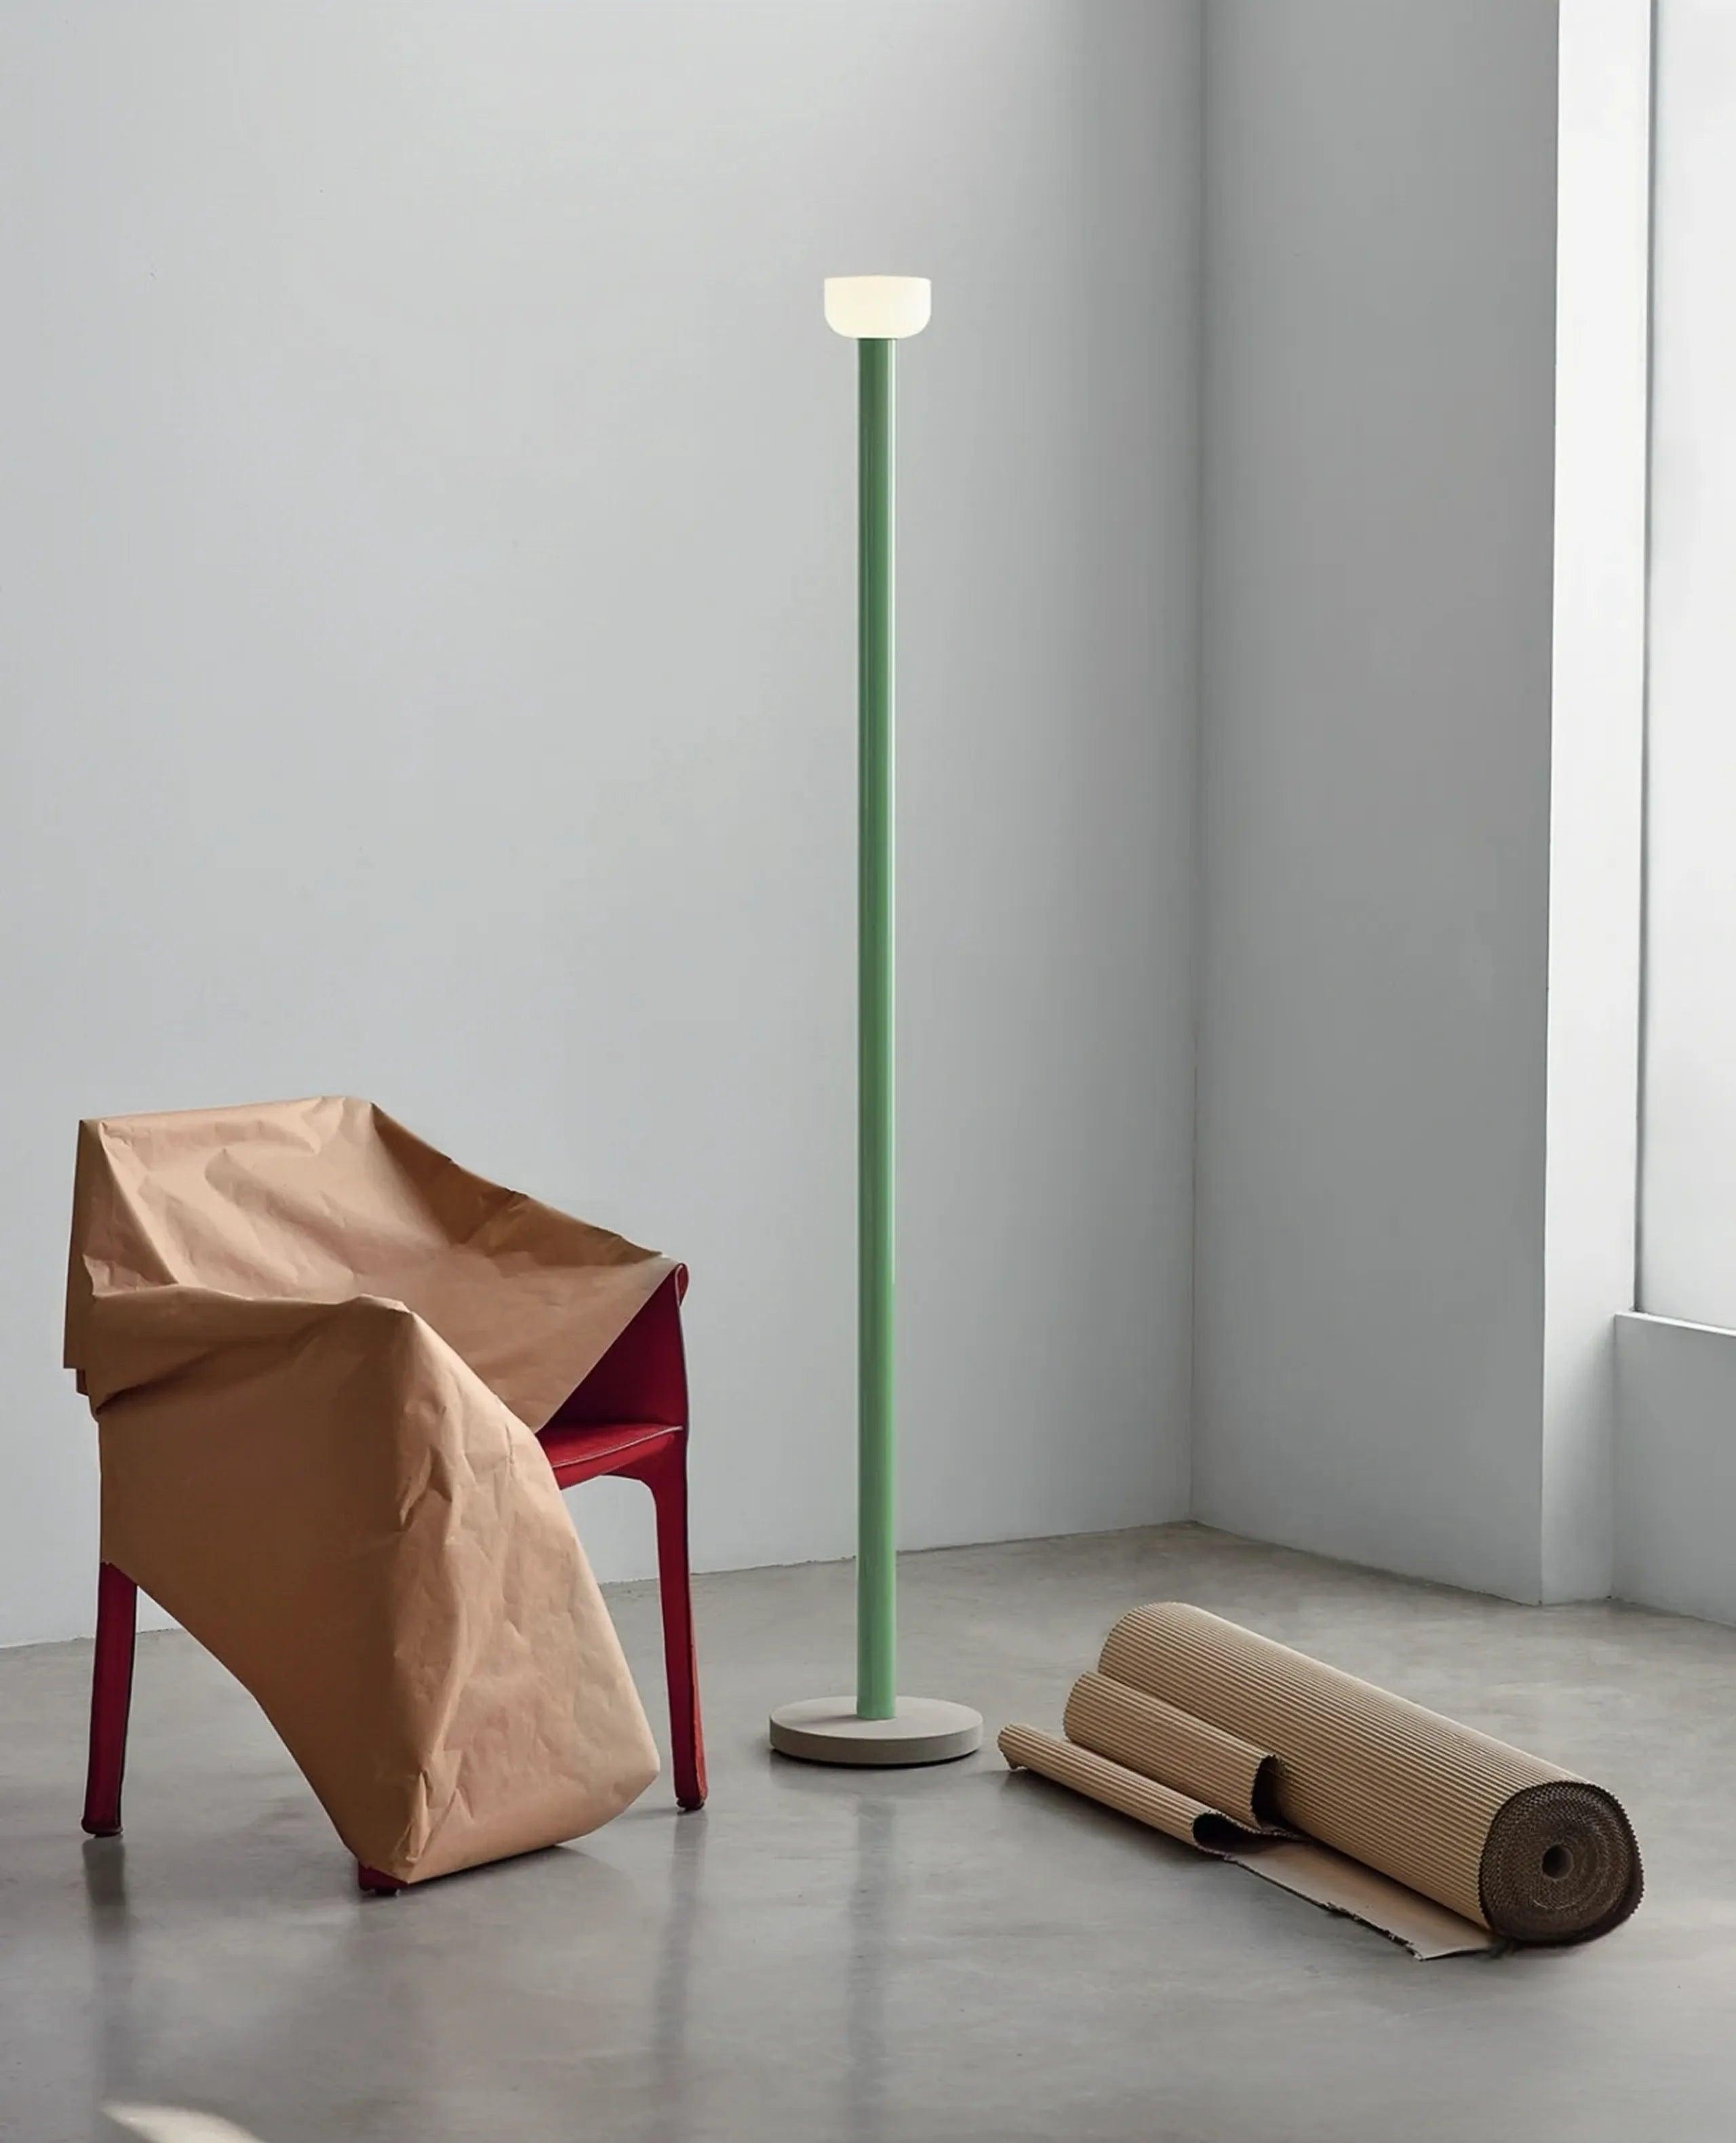 Stylish Floor Lamps | Versatile Floor Lamps | 3 Differenc Colours Available - LTP Creative Lighting